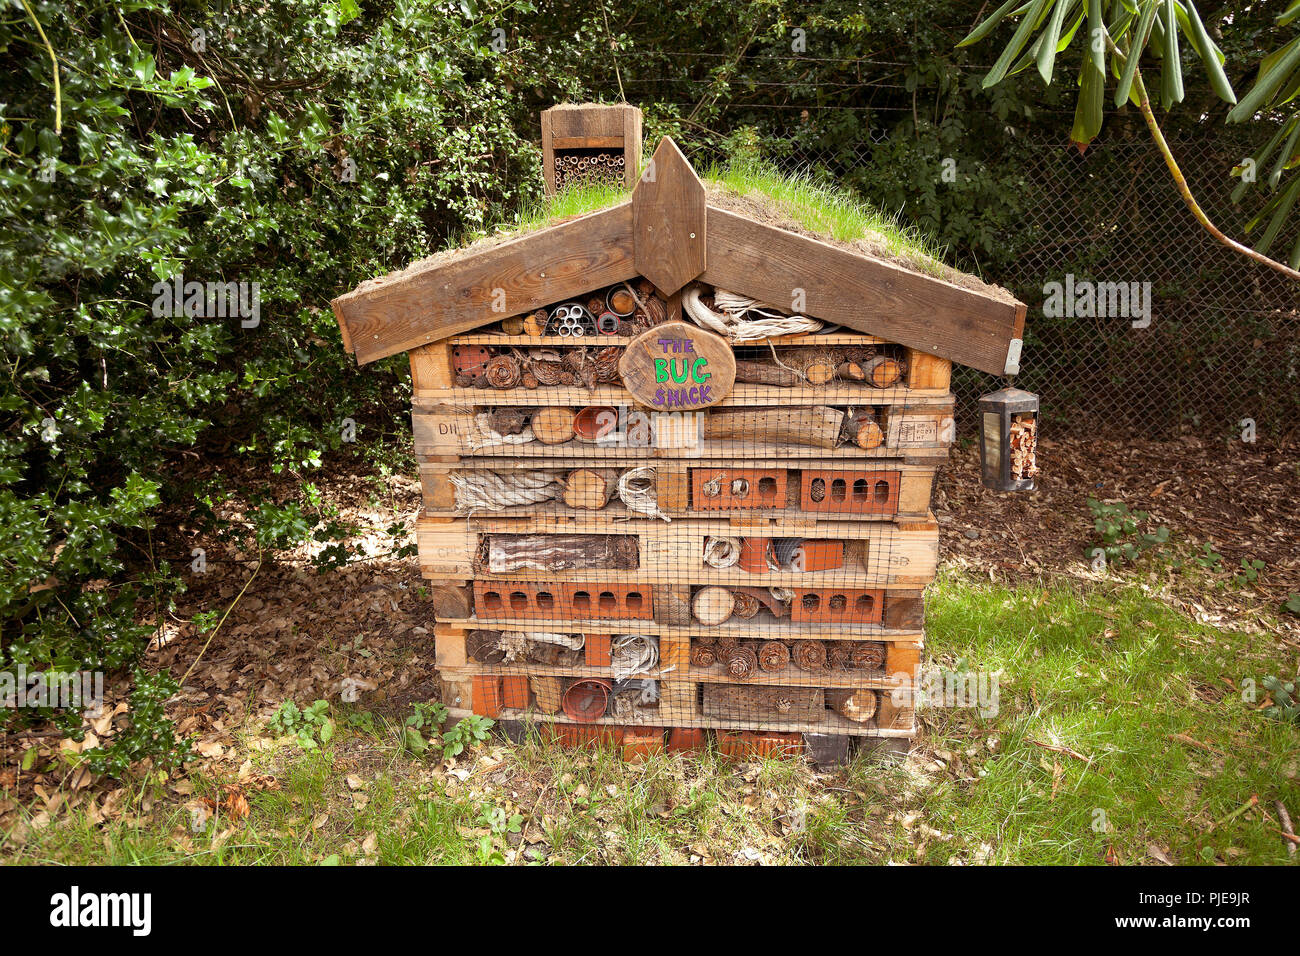 Bug shack for insects, shelter when overwintering. A mixture of various habitats, bamboo, bricks, pine cones, lots of nooks and crannies. Stock Photo